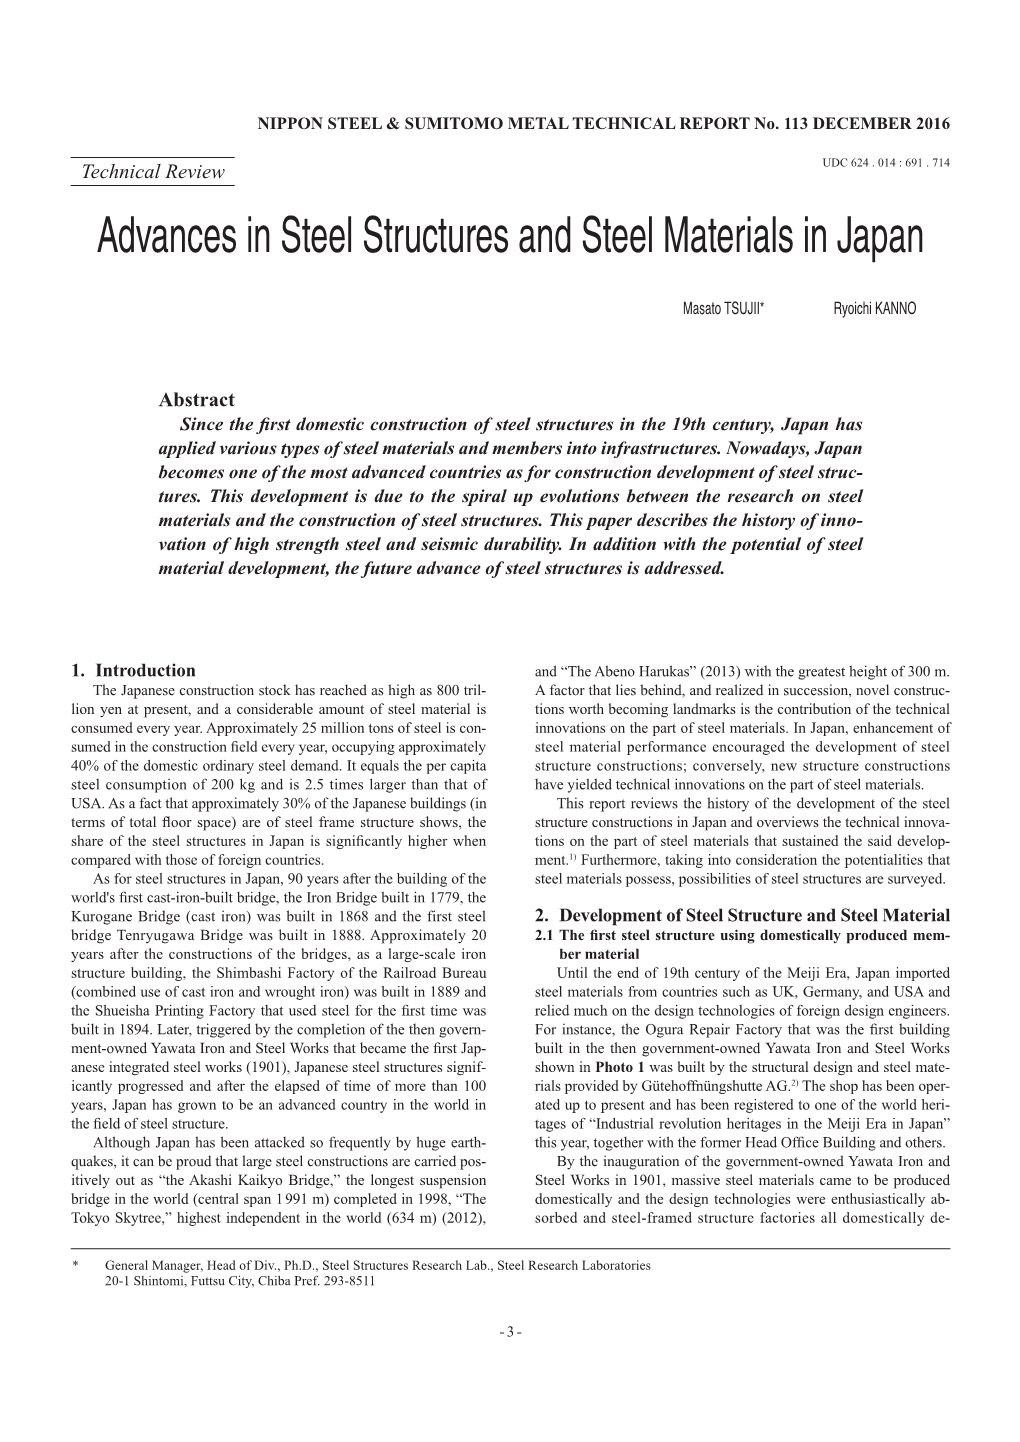 Advances in Steel Structures and Steel Materials in Japan